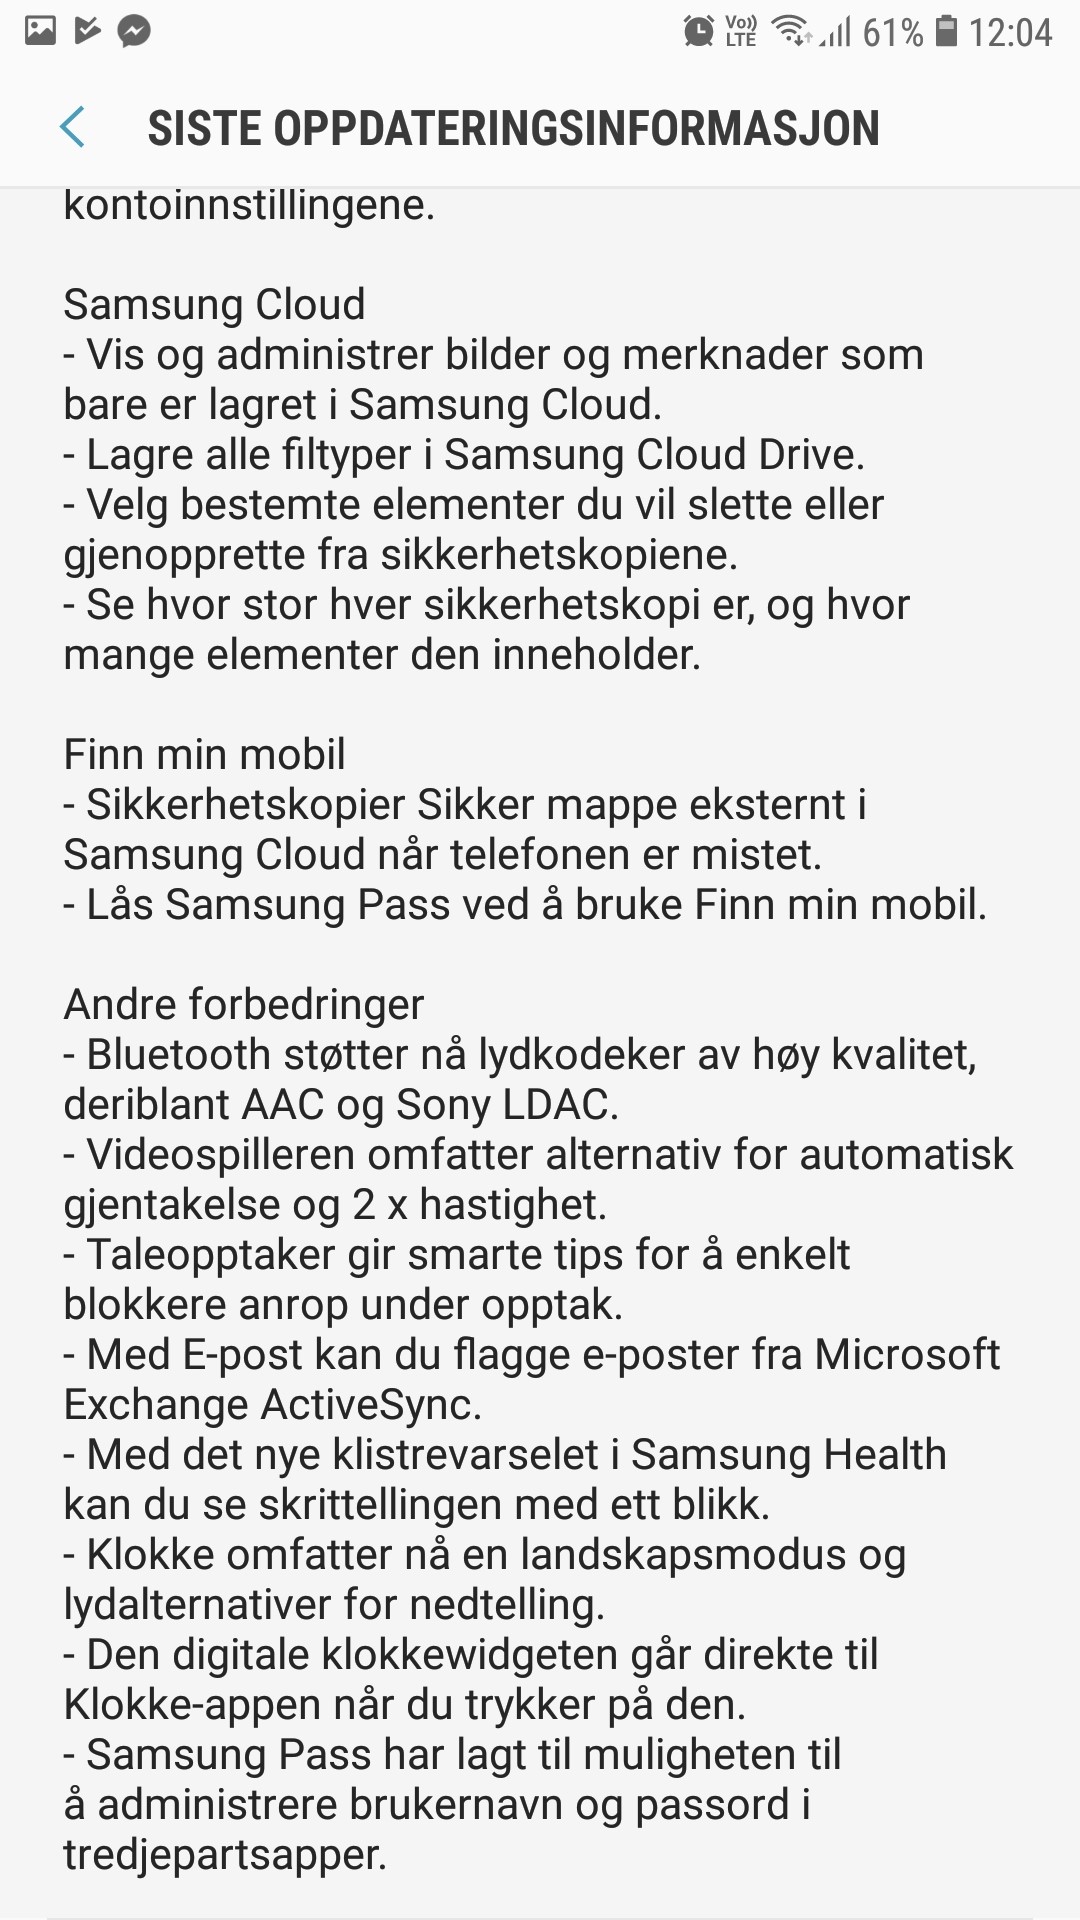 Android 8 til Galaxy S7.